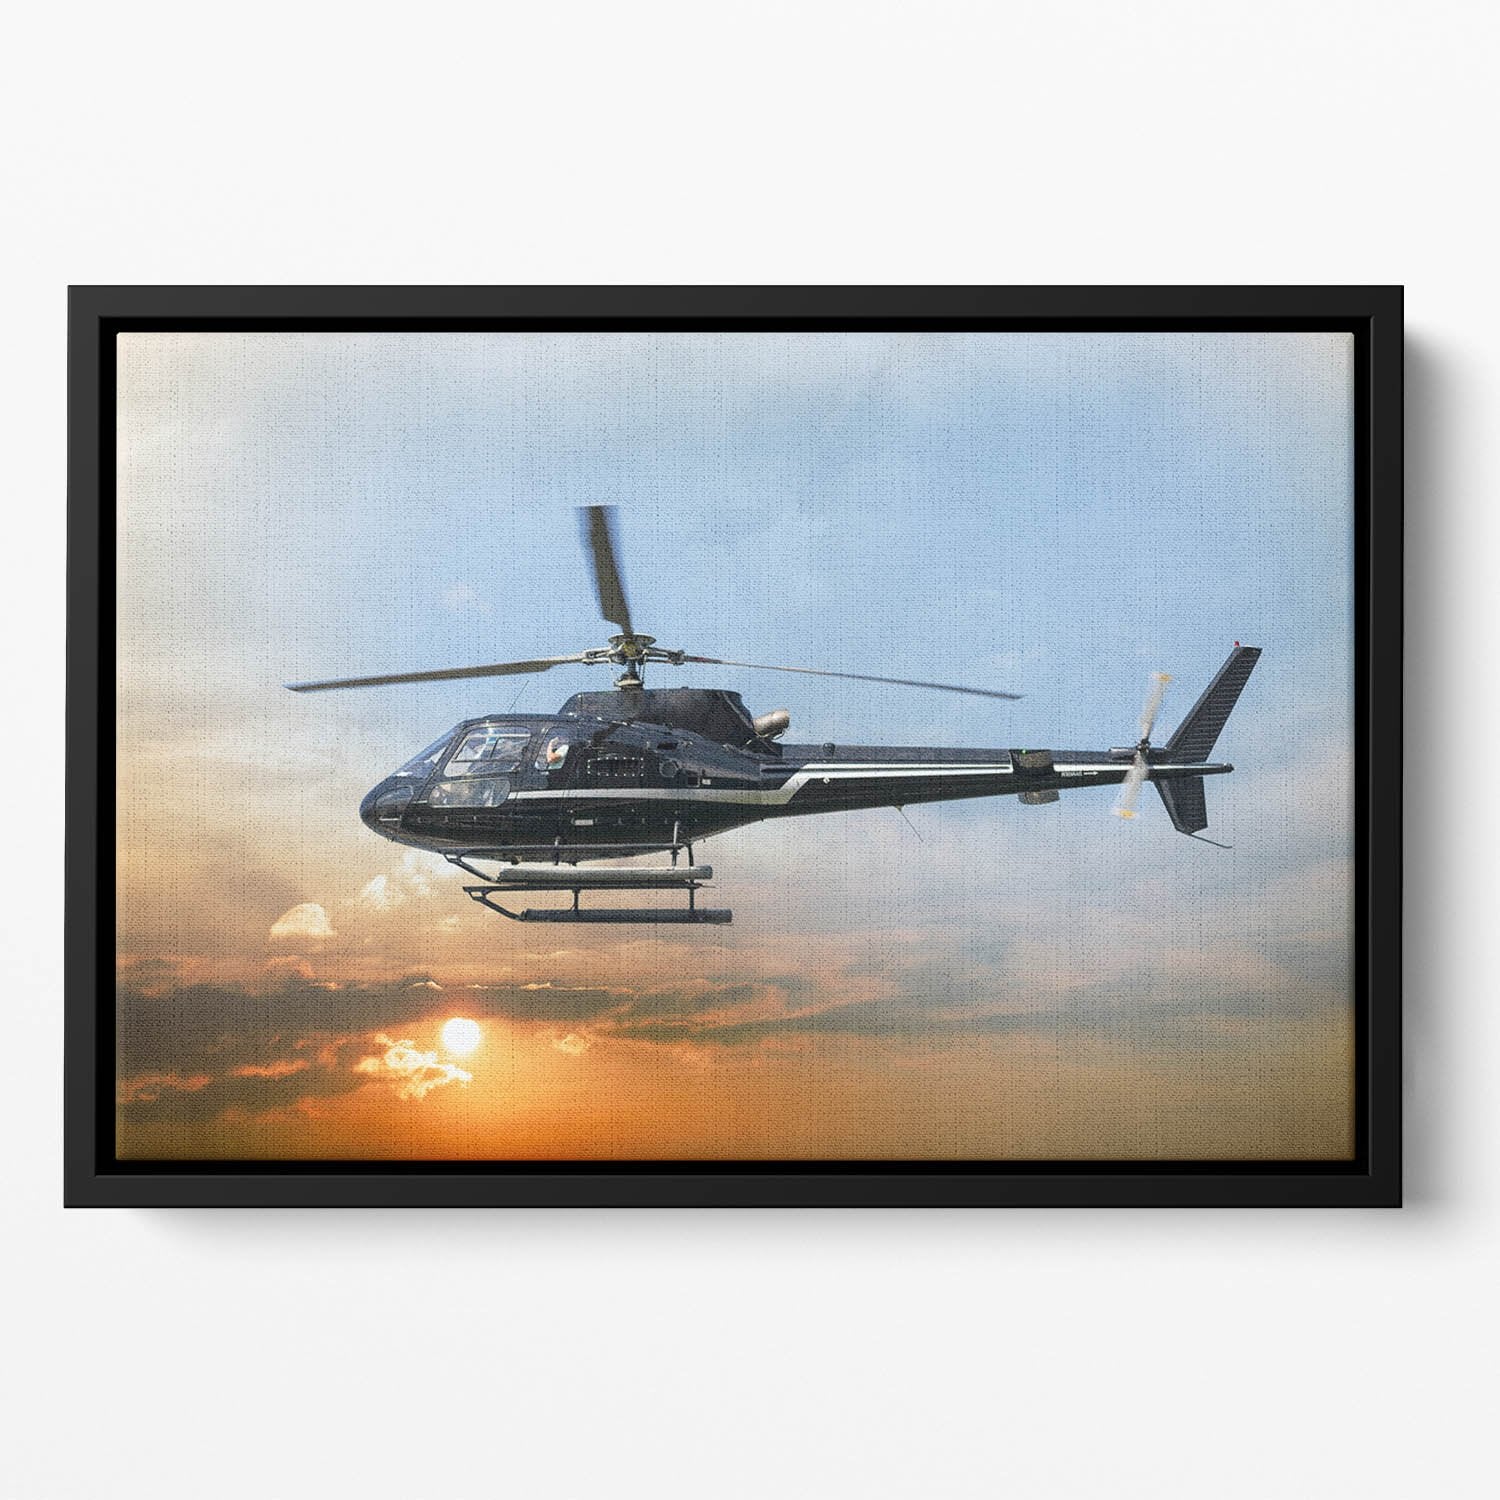 Helicopter for sightseeing Floating Framed Canvas